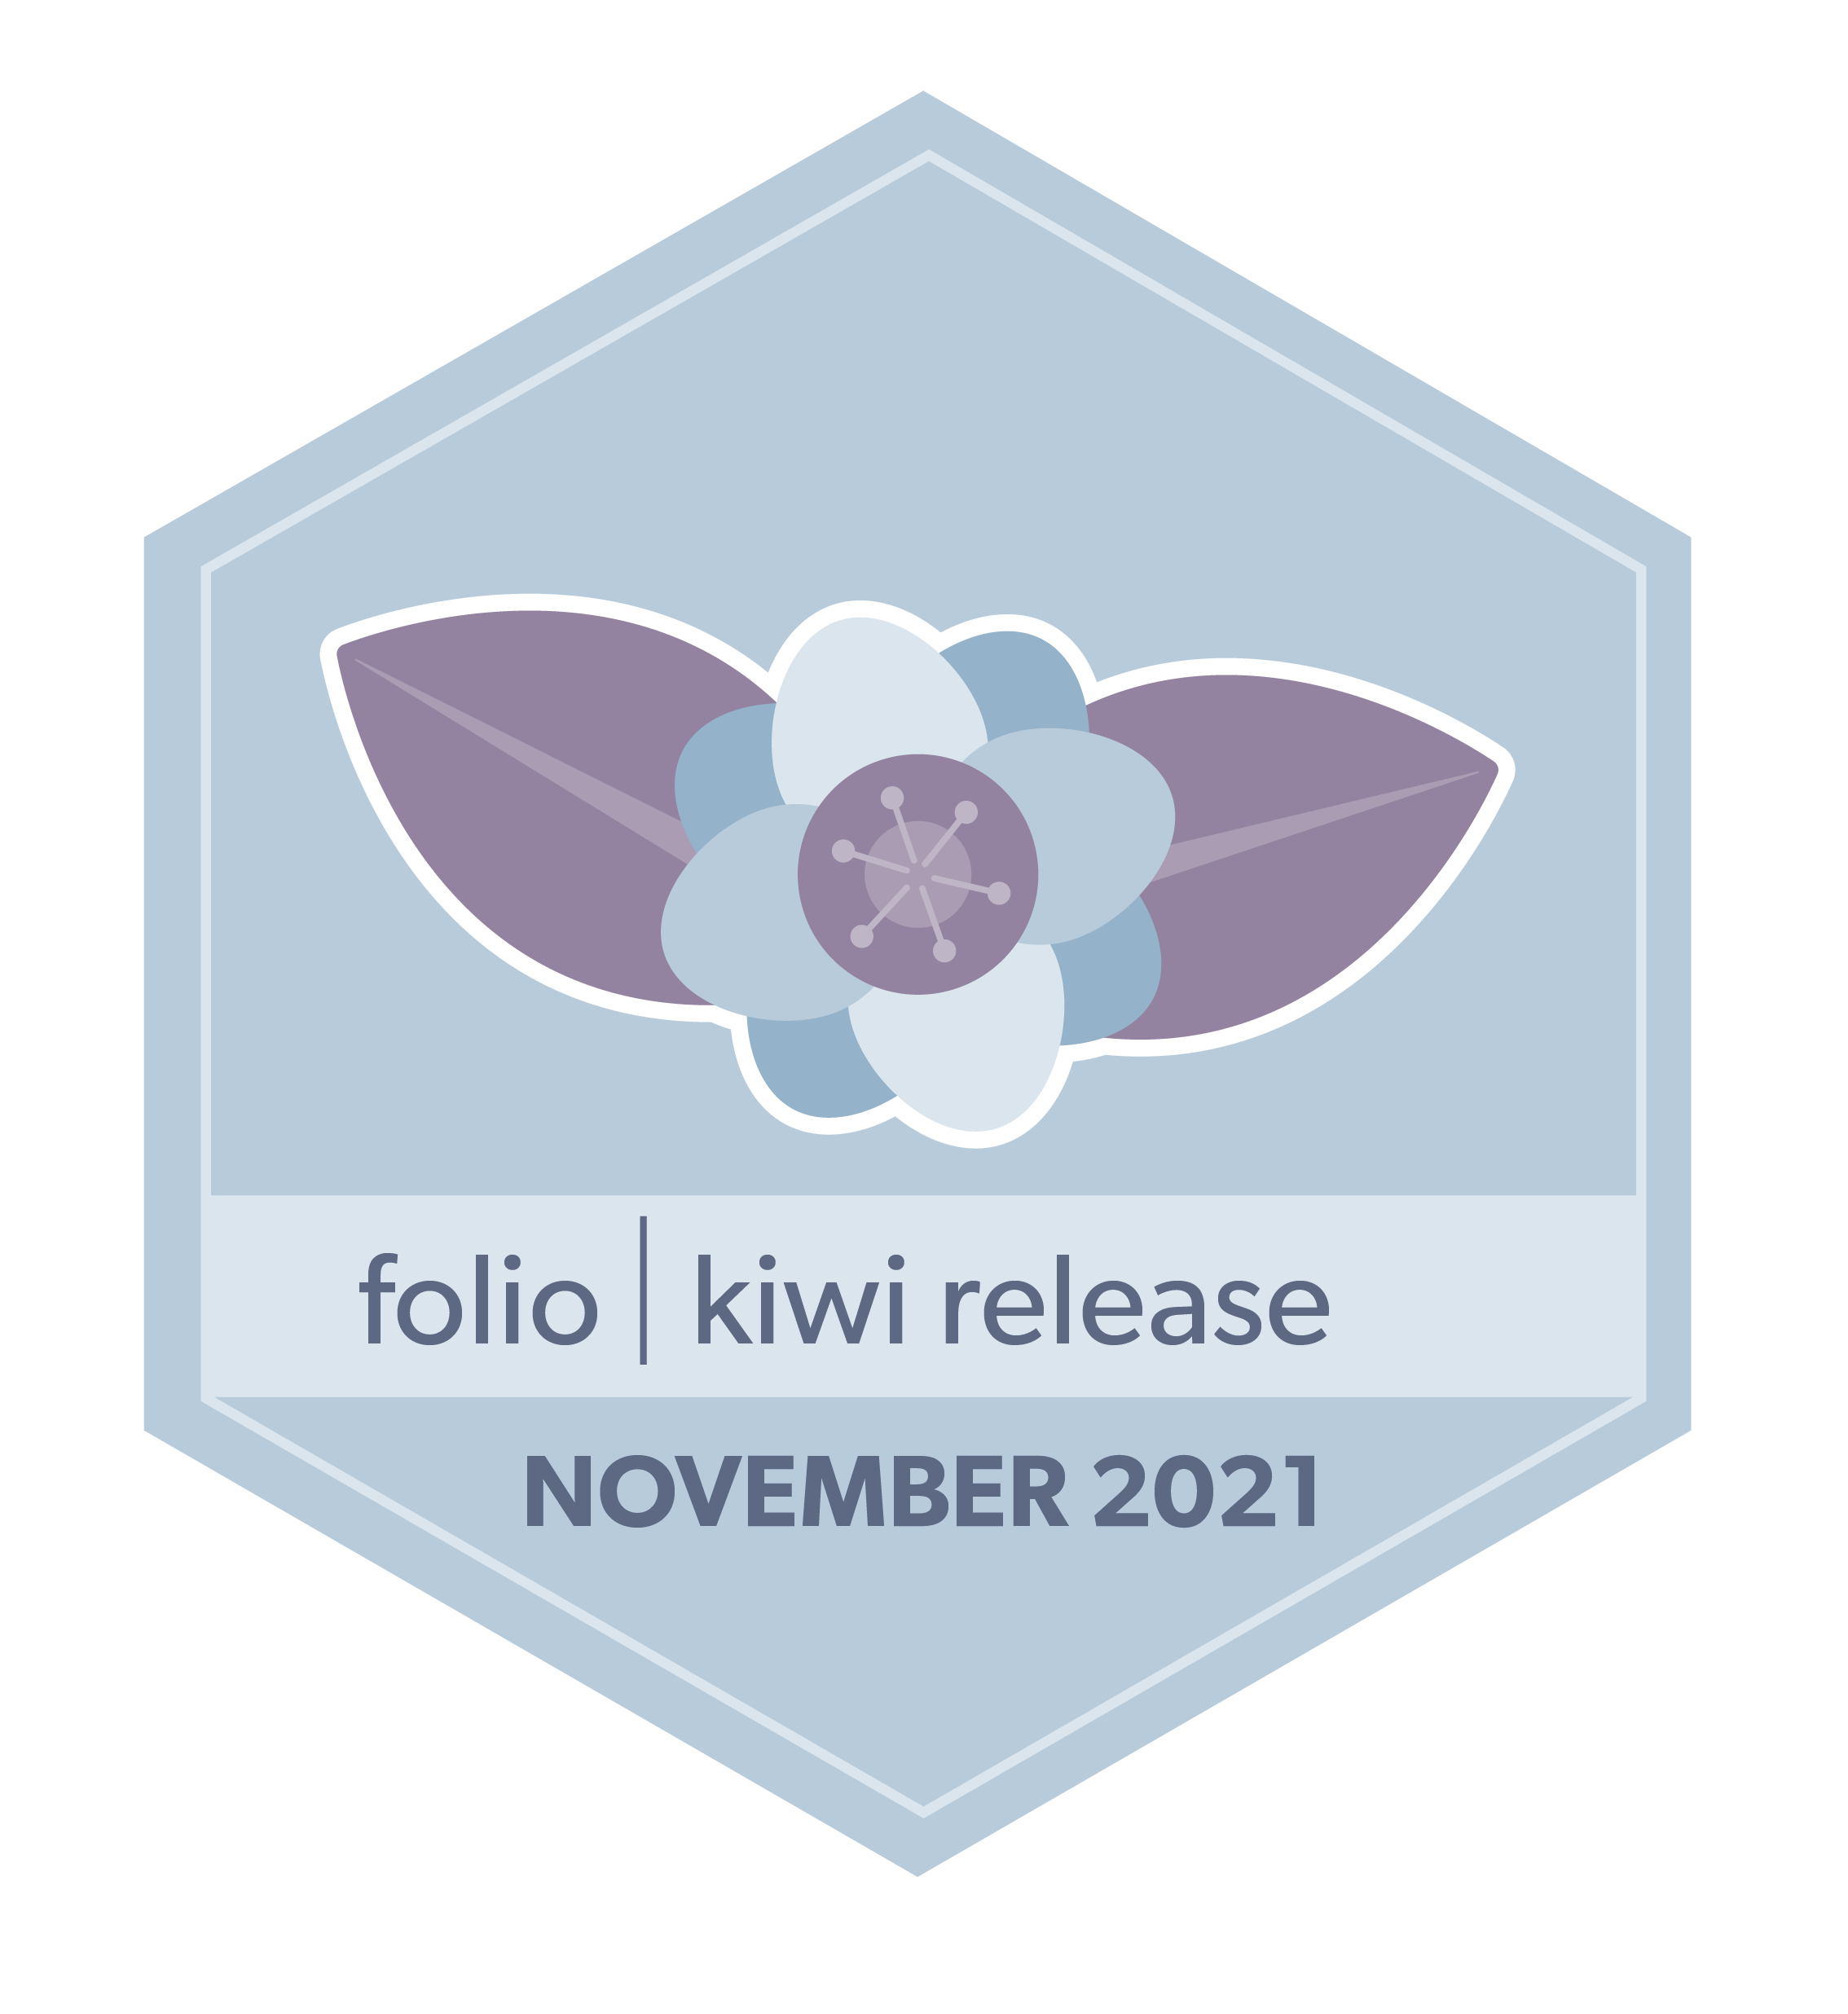 FOLIO Launches Kiwi release and is getting close to having 50 institutions live on the platform